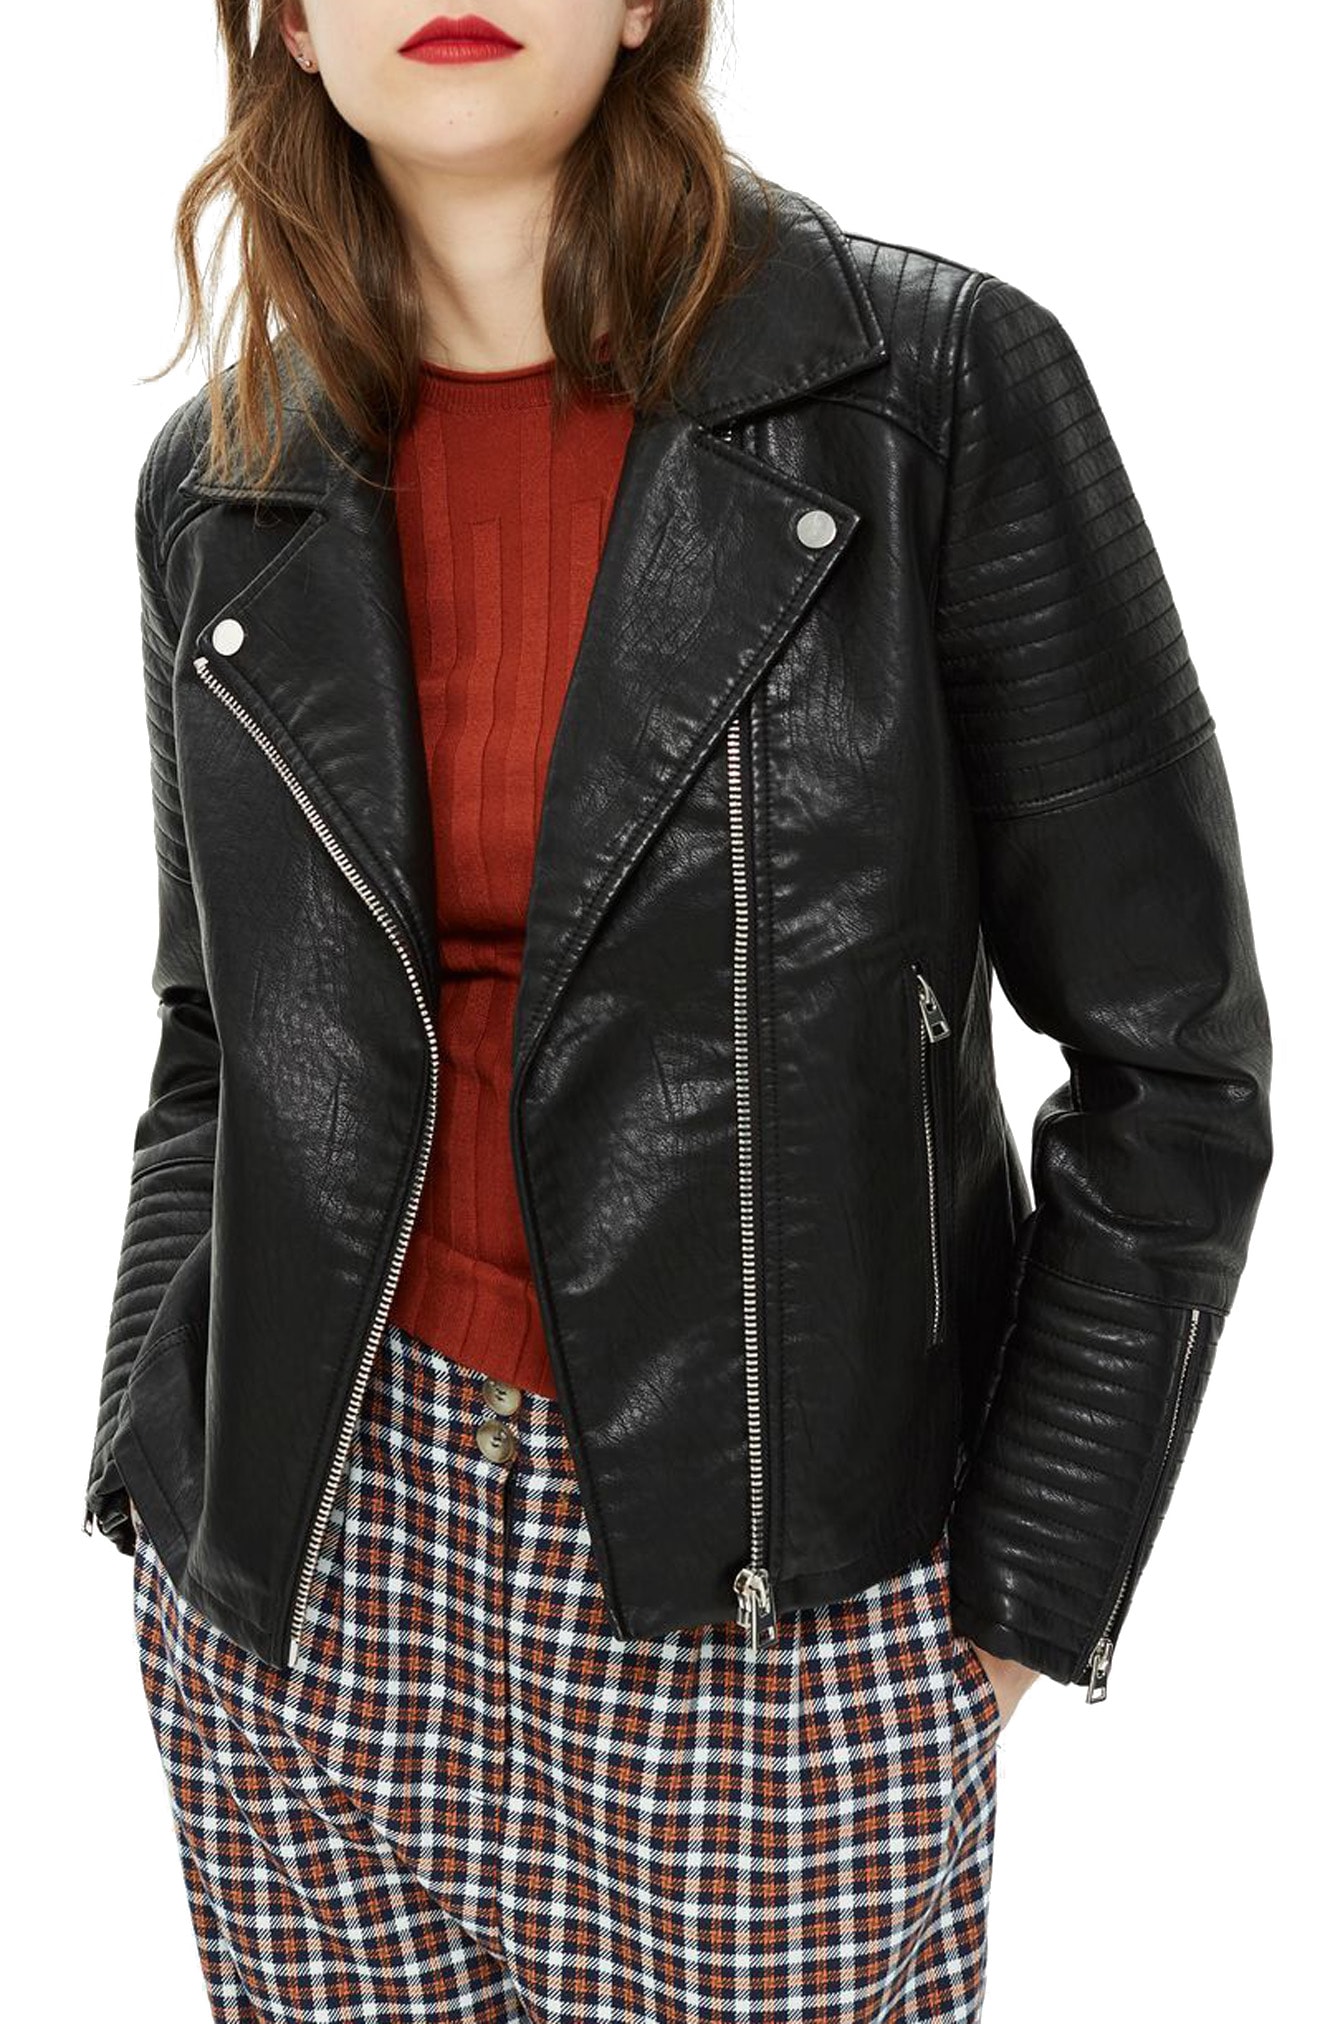 Get trendy womens jacket to look
stylish  this fall season